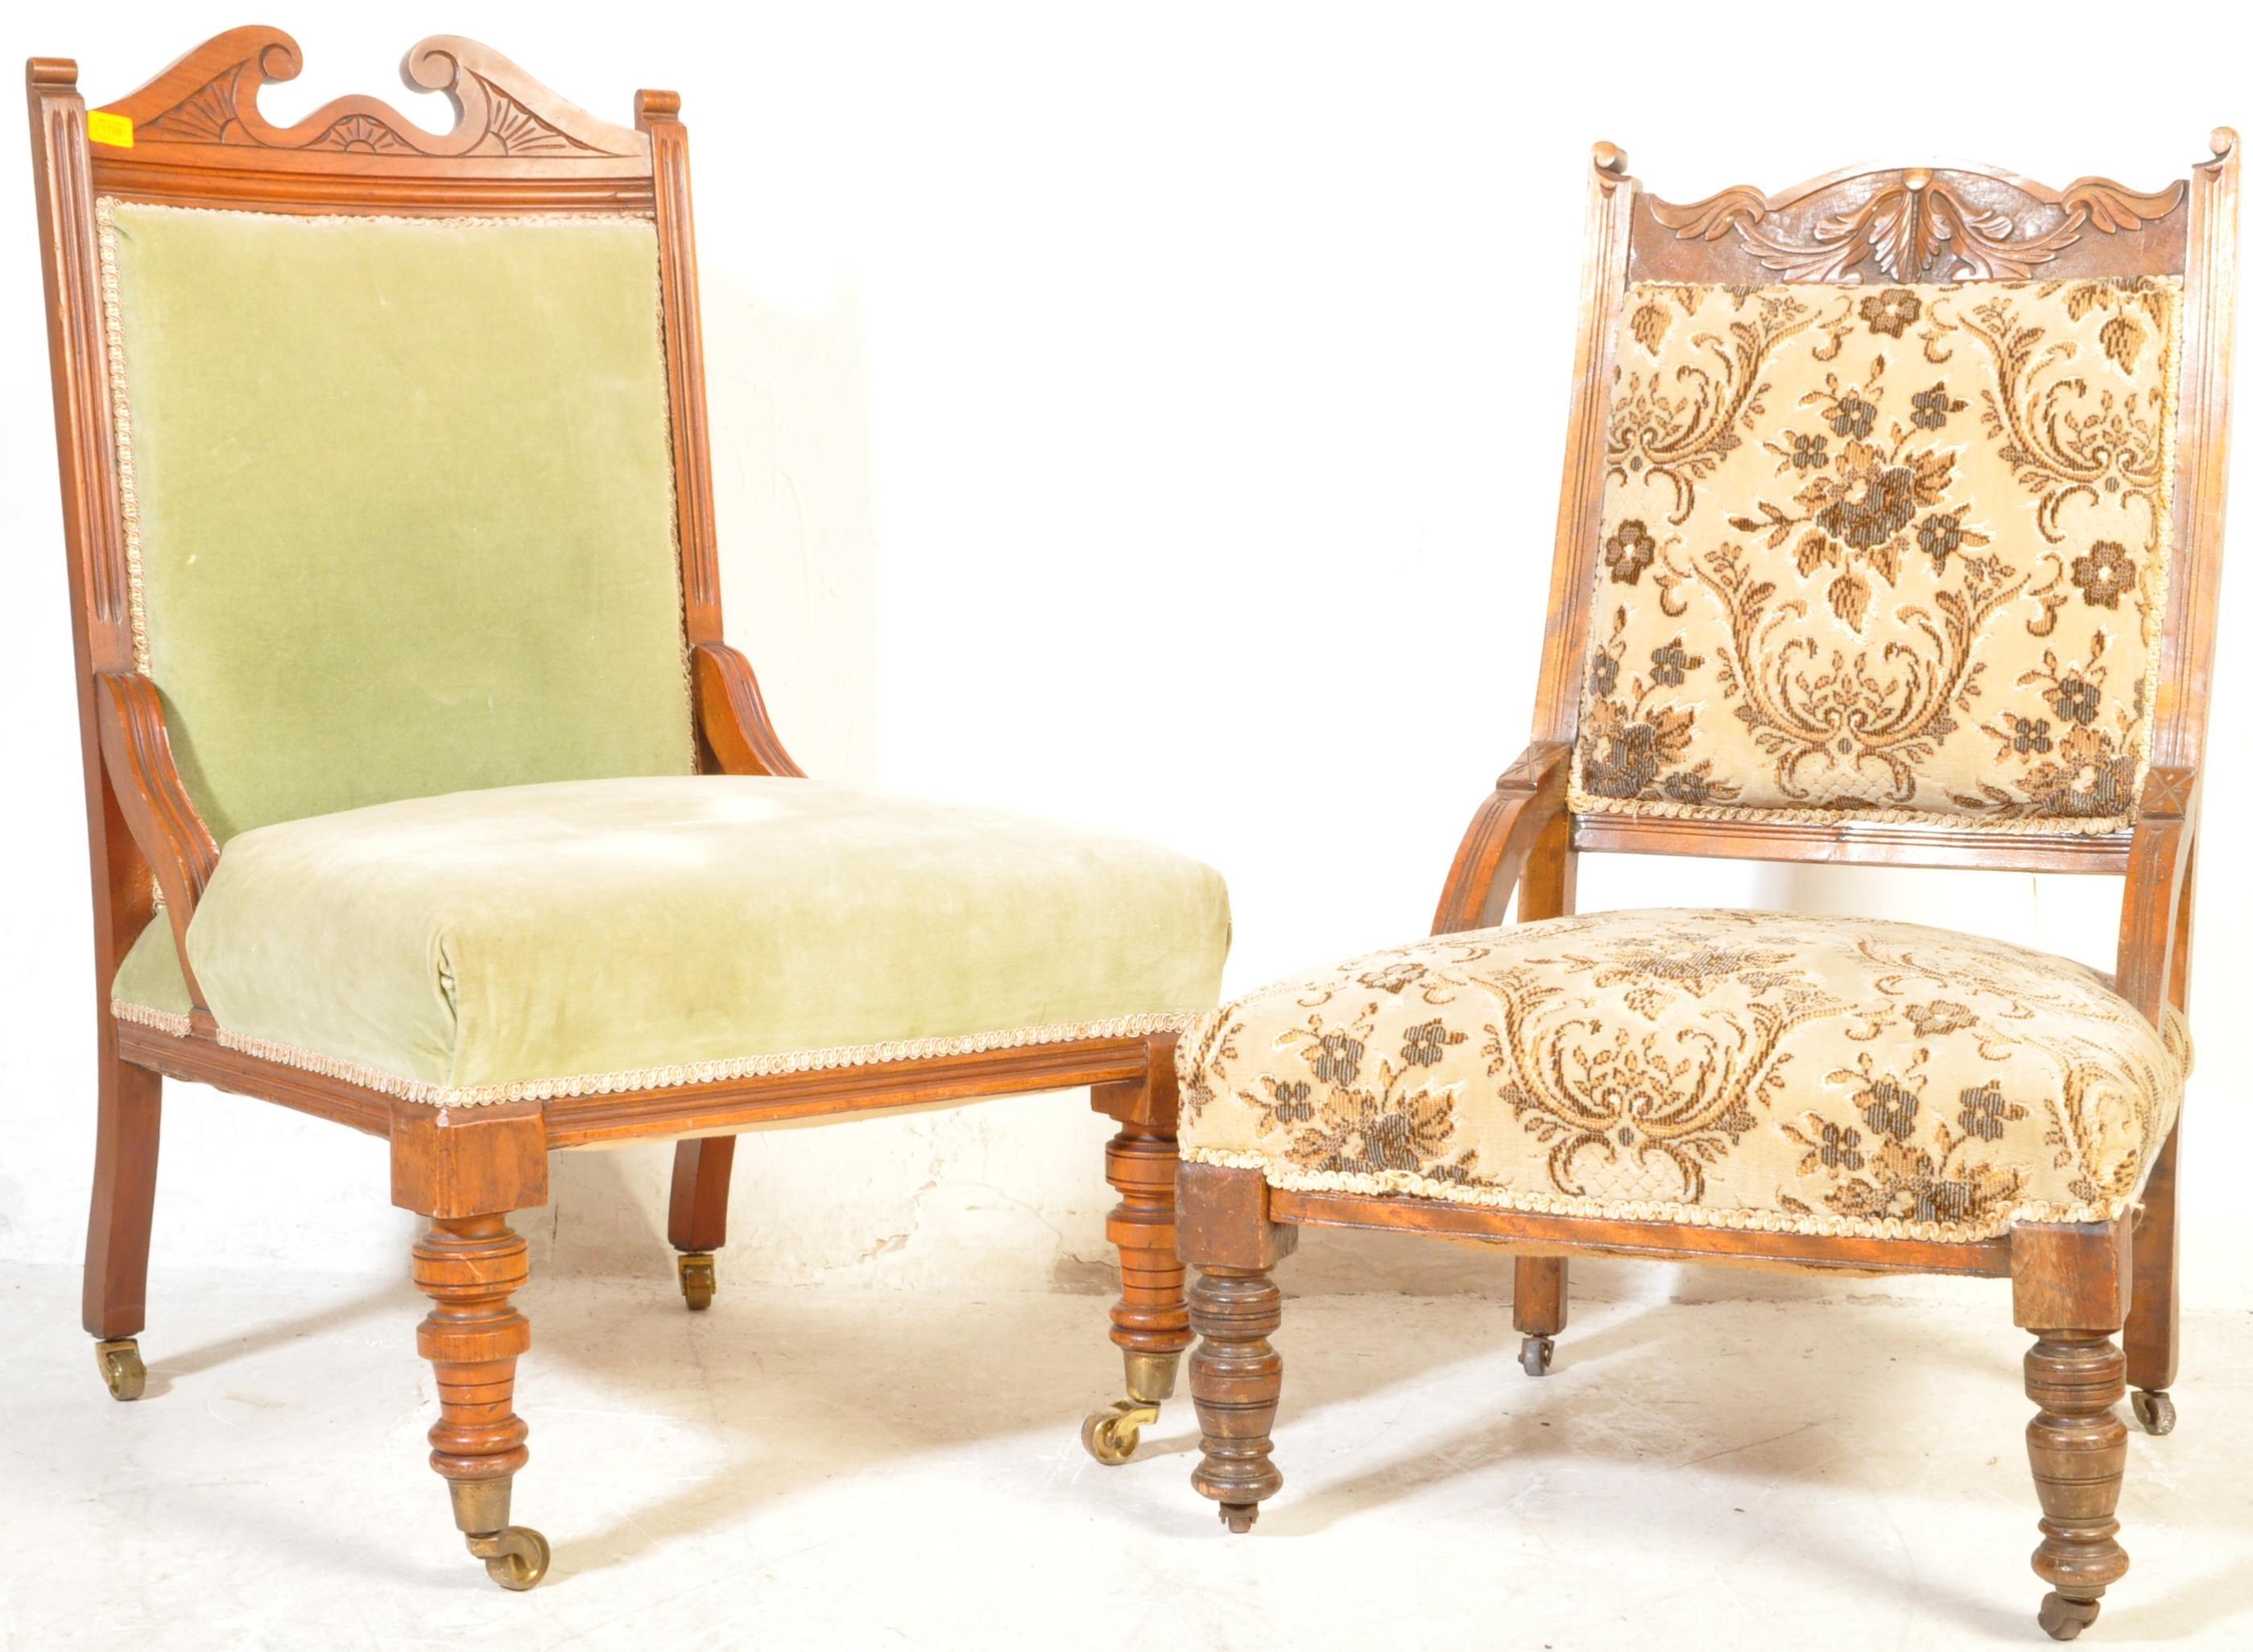 VICTORIAN 19TH CENTURY MAHOGANY LADIES ARMCHAIR & OTHER